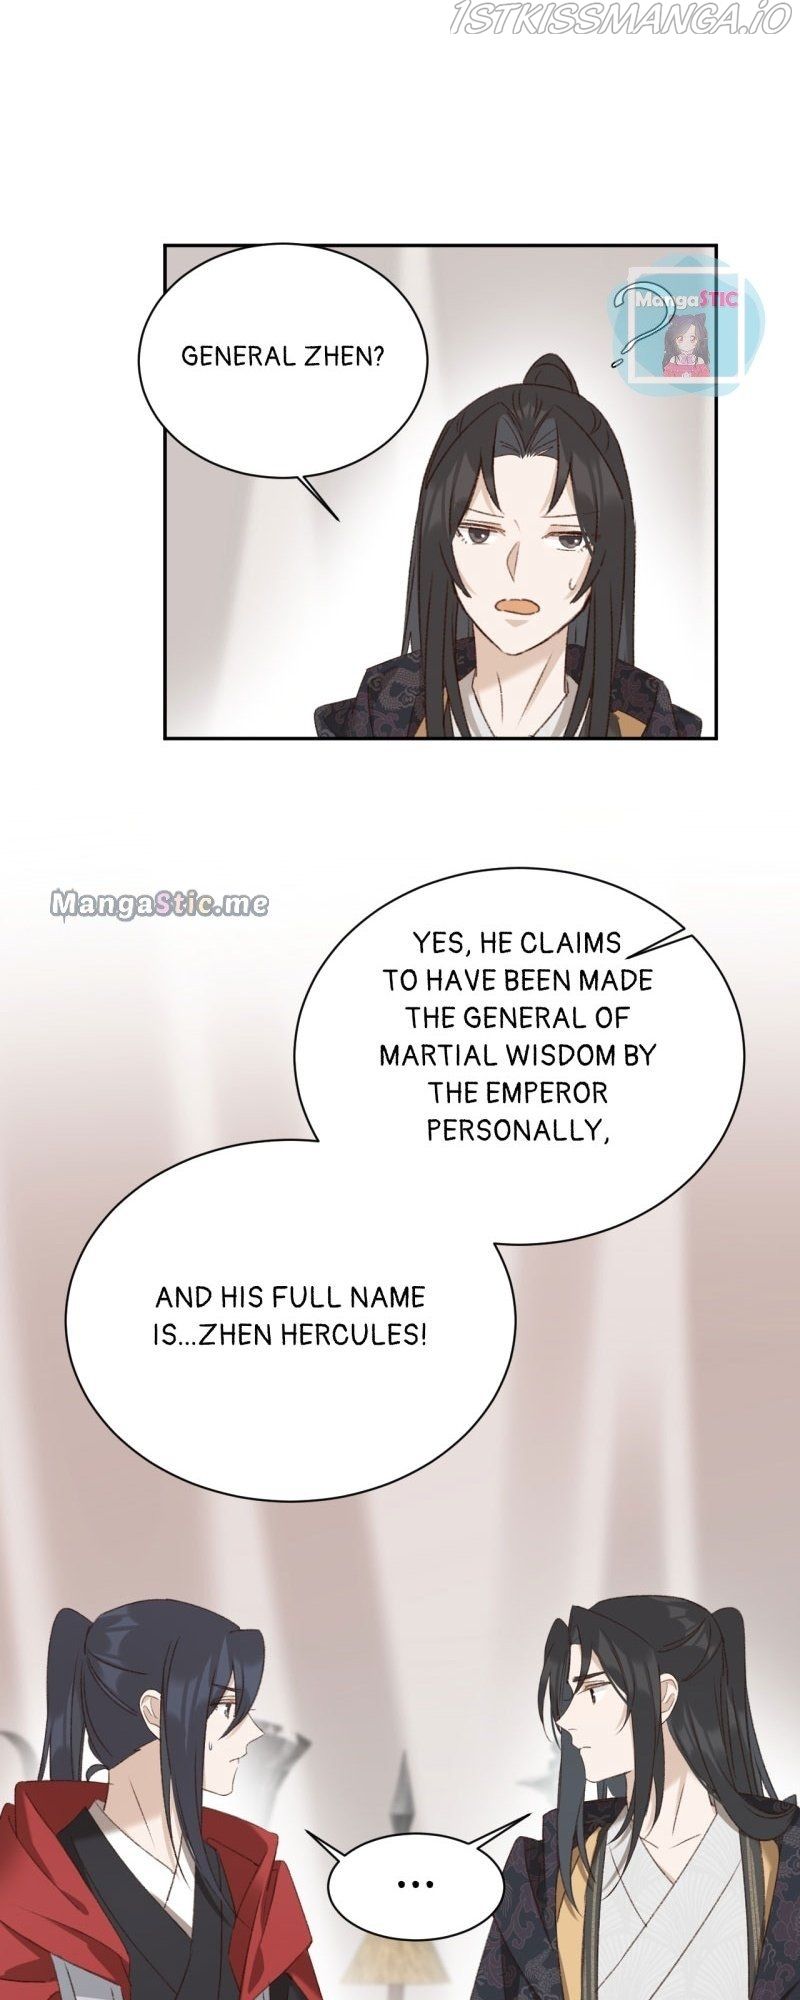 The Empress with No Virtue chapter 65